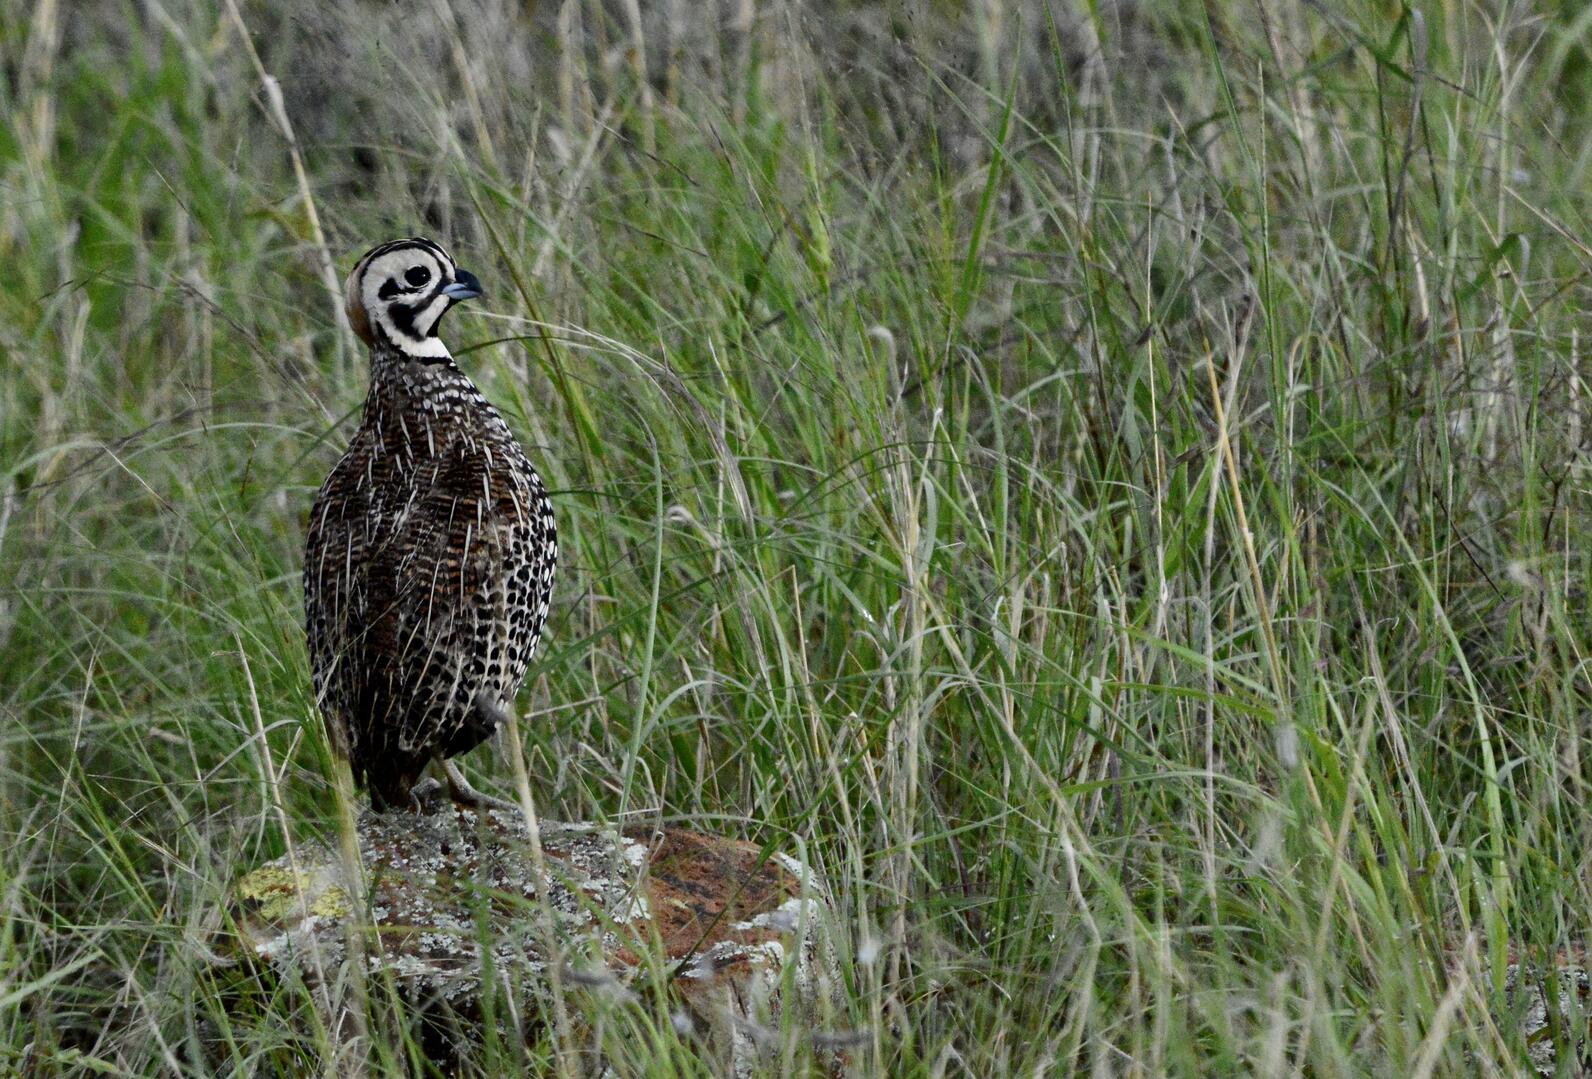 A male Montezuma Quail, an elaborately patterend quail with a round and heavily patterned face, stands tall and alert amongst dense grass.